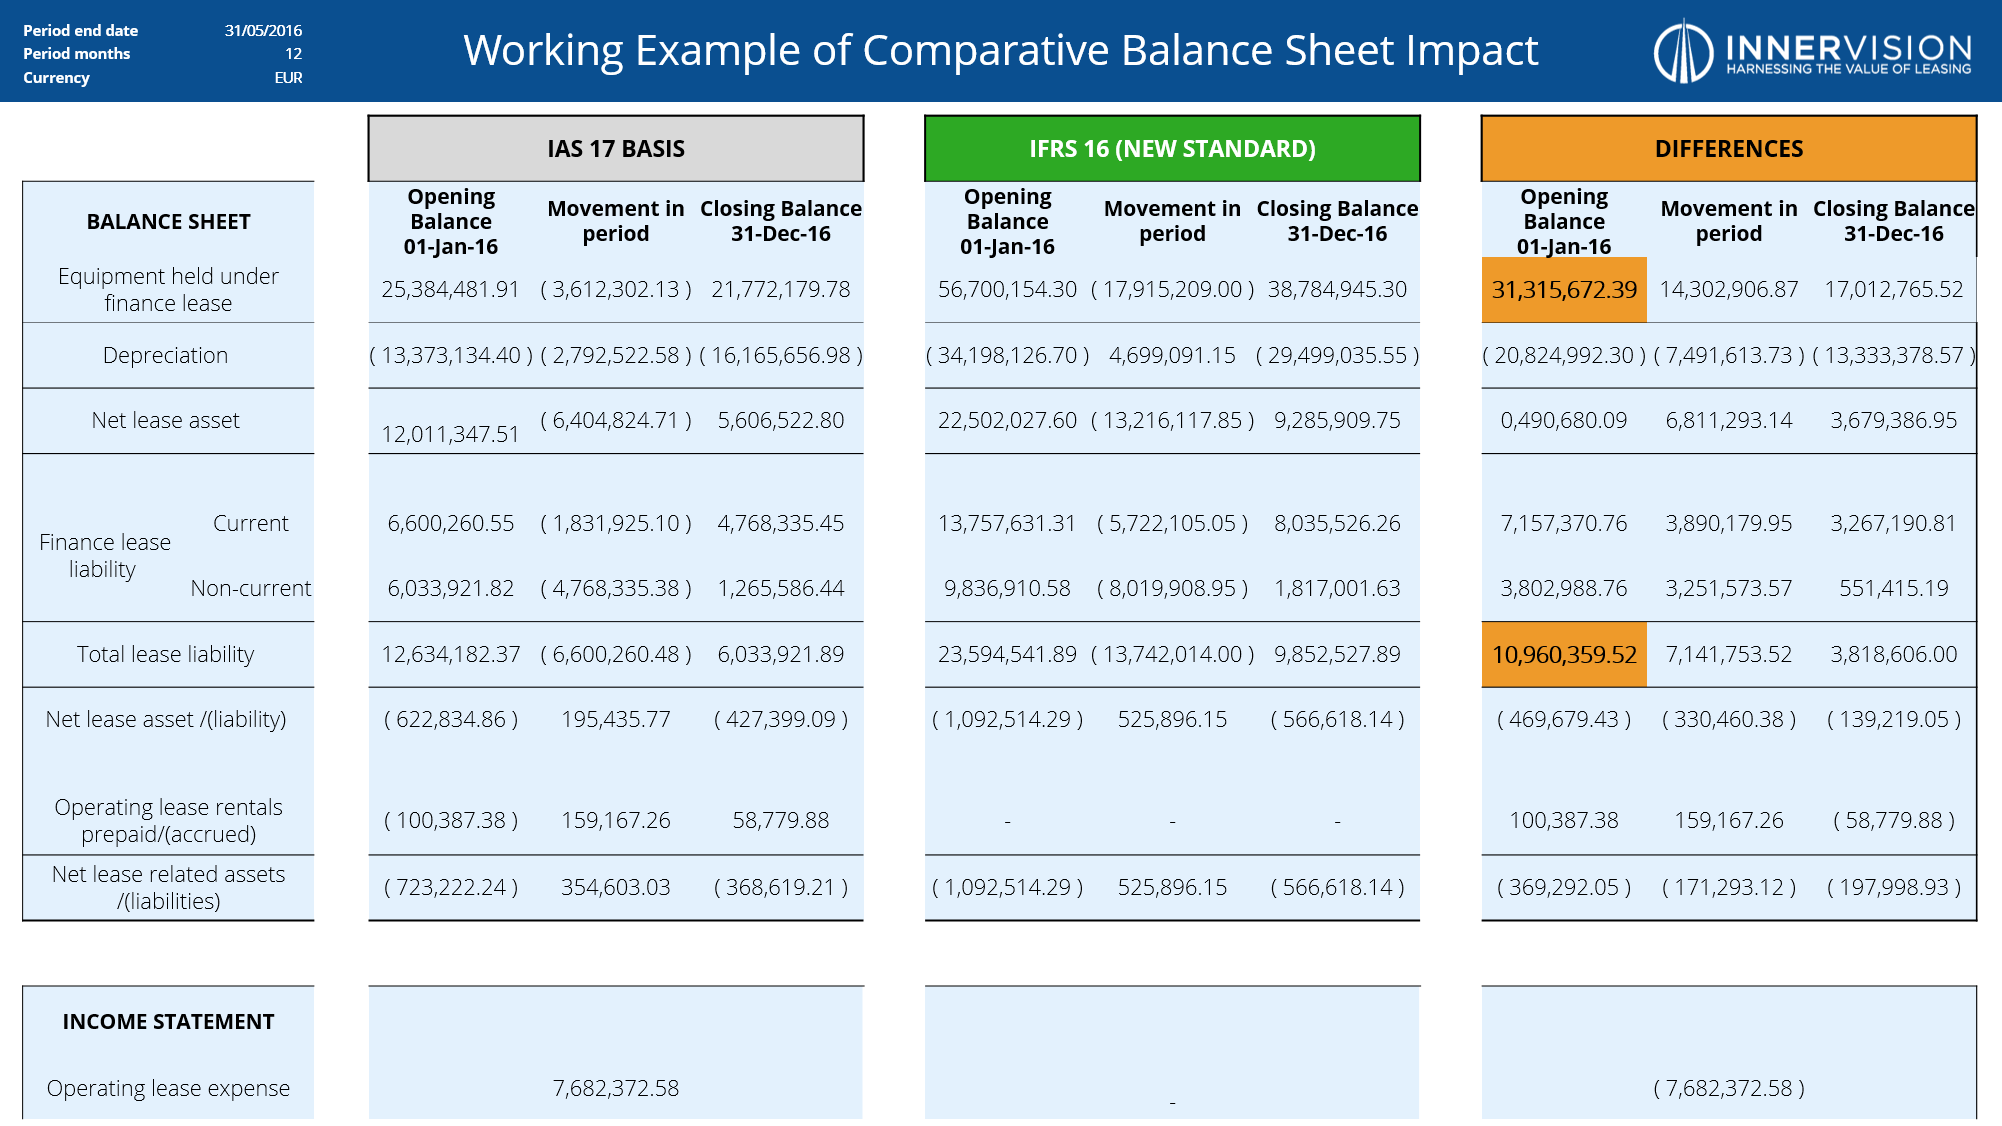 Working_Example_of_Comparative_Balance_Sheet_Impact_1-1.png